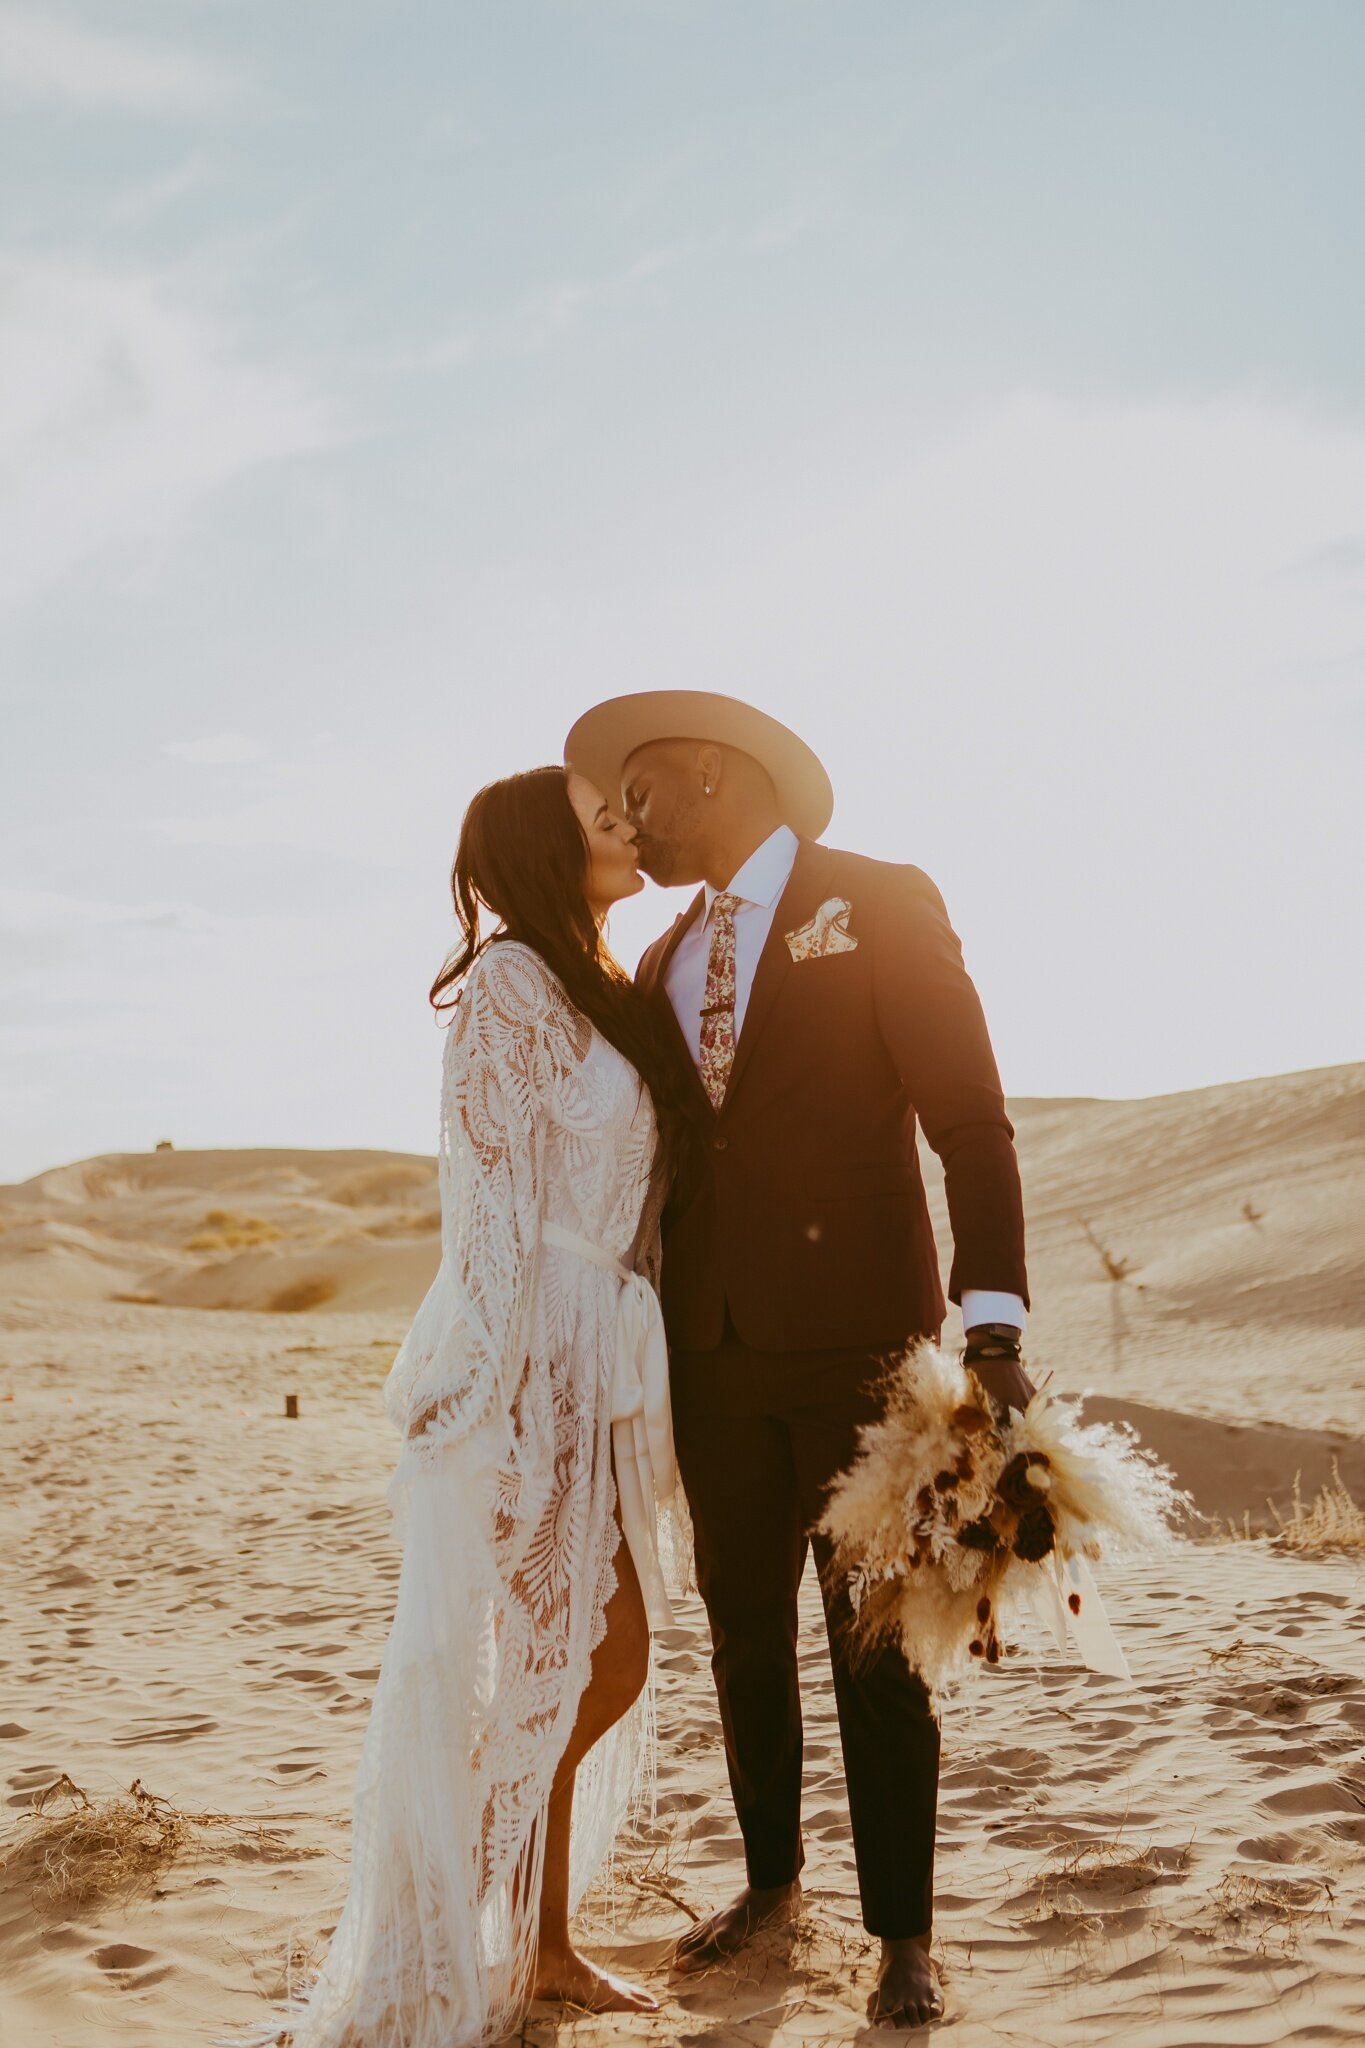 Galleries of Western Elopements and Info on How To Elope | Emily May Photo